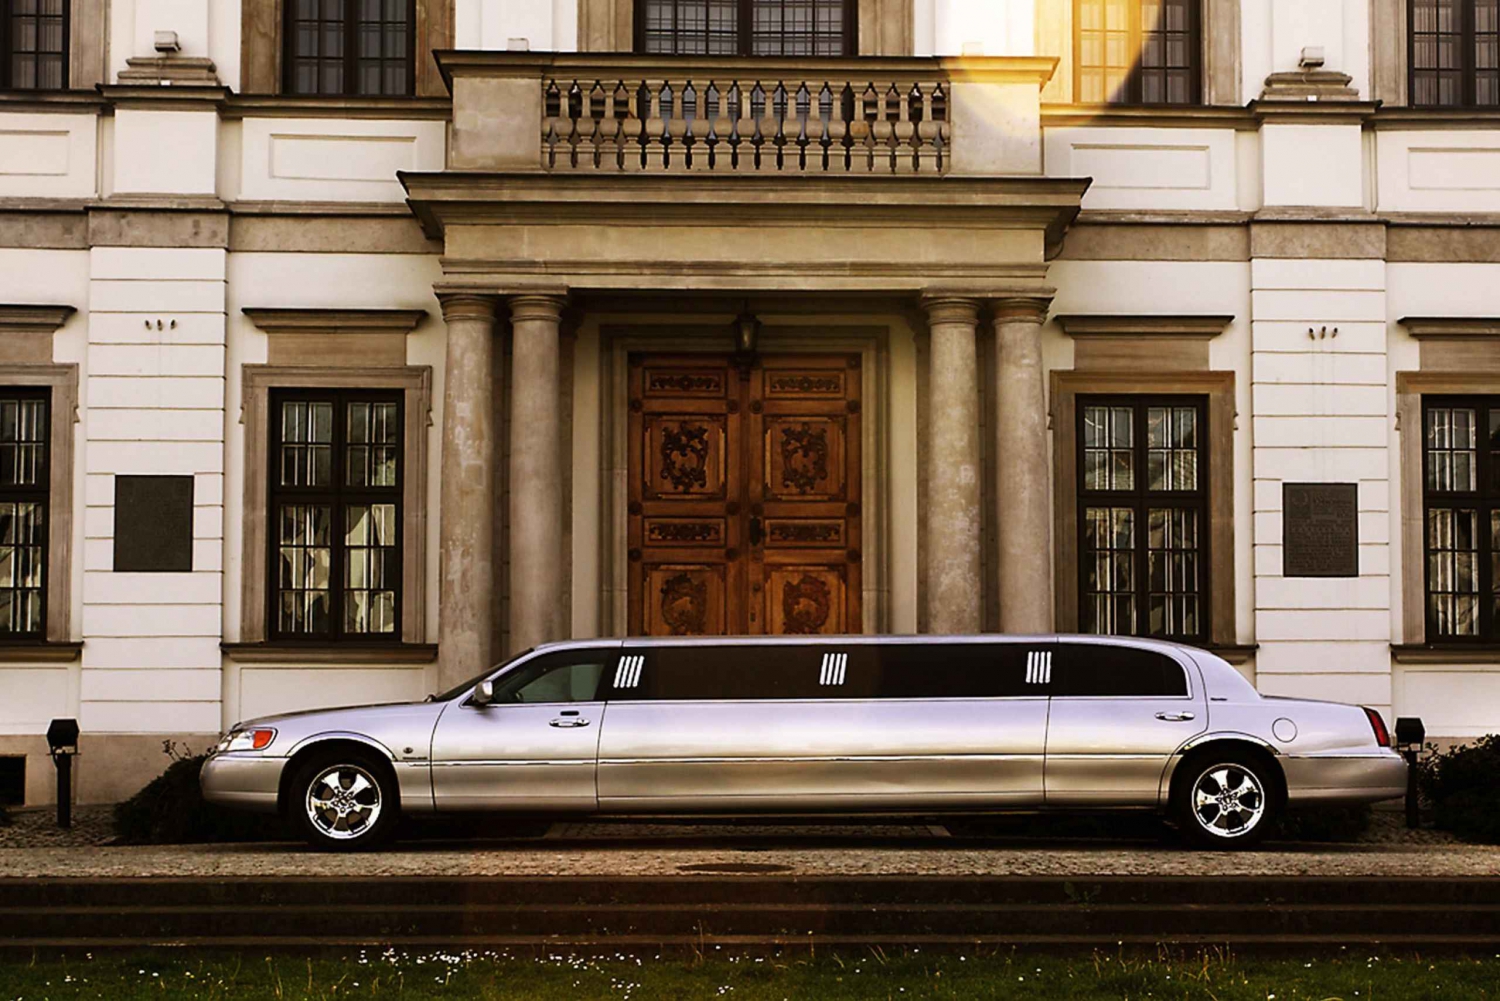 Chopin Airport One–Way Limousine Transfer